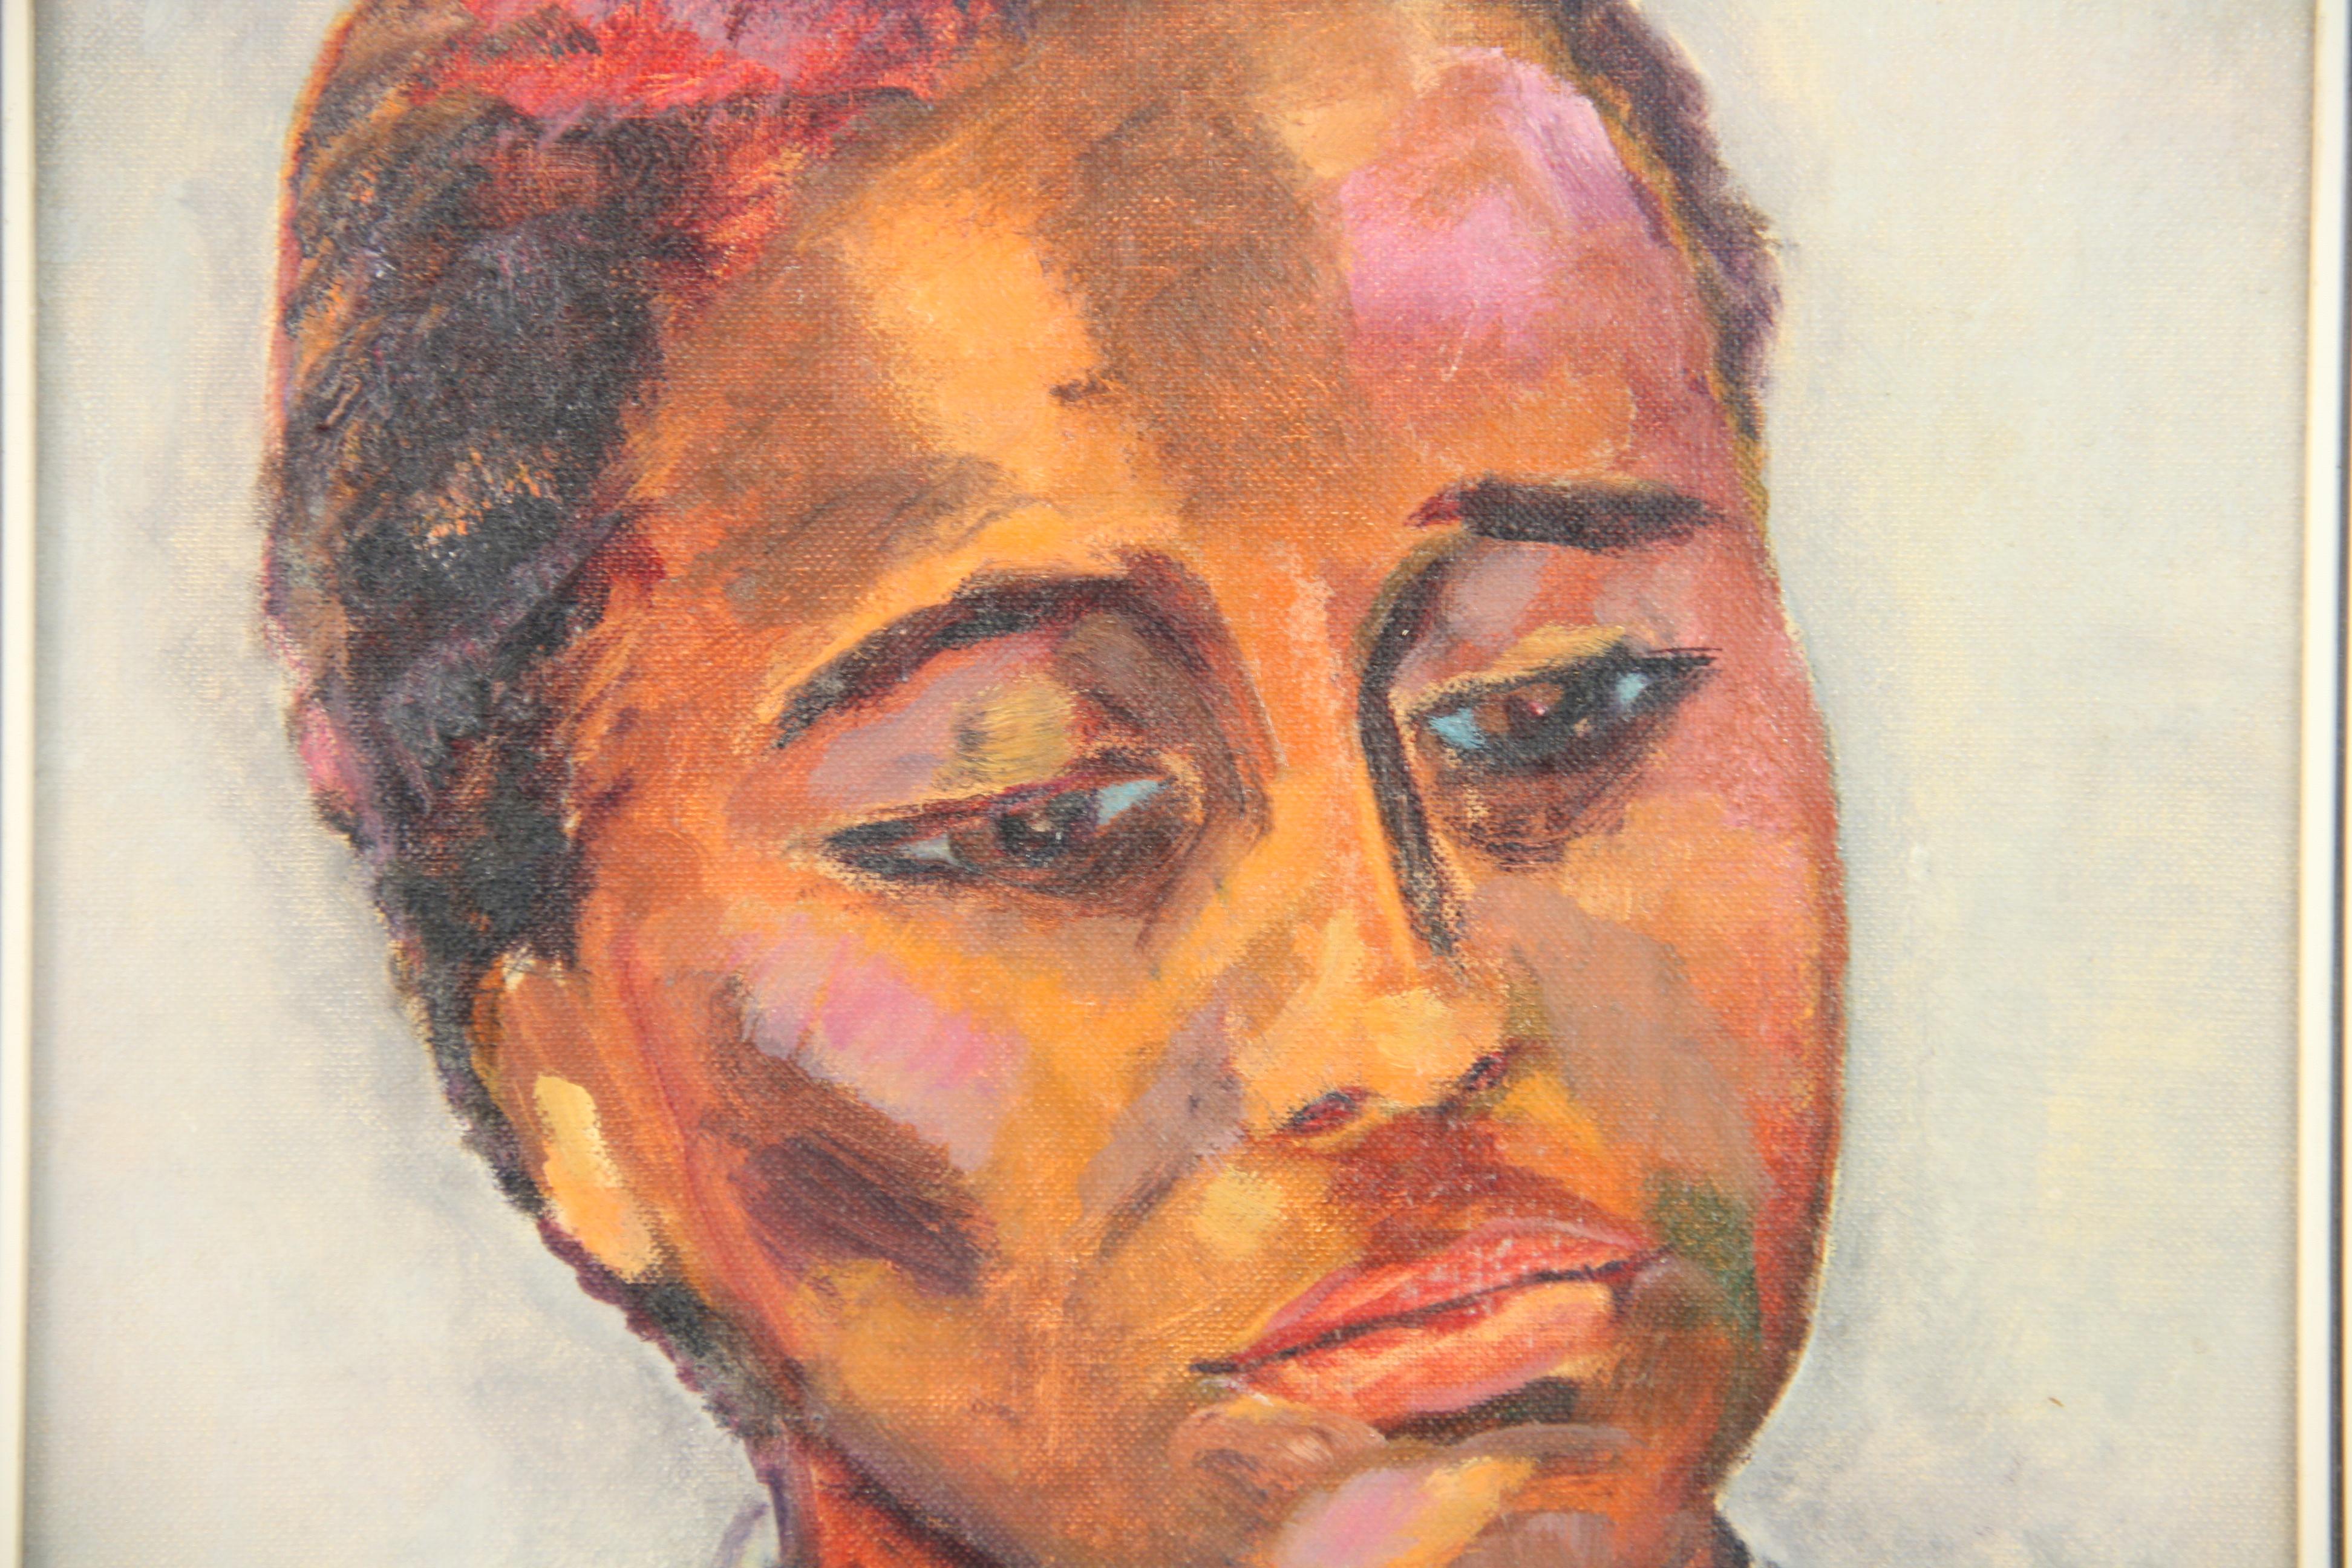 Caribbean Island Female  Portrait  Painting - Brown Portrait Painting by R.Wolf